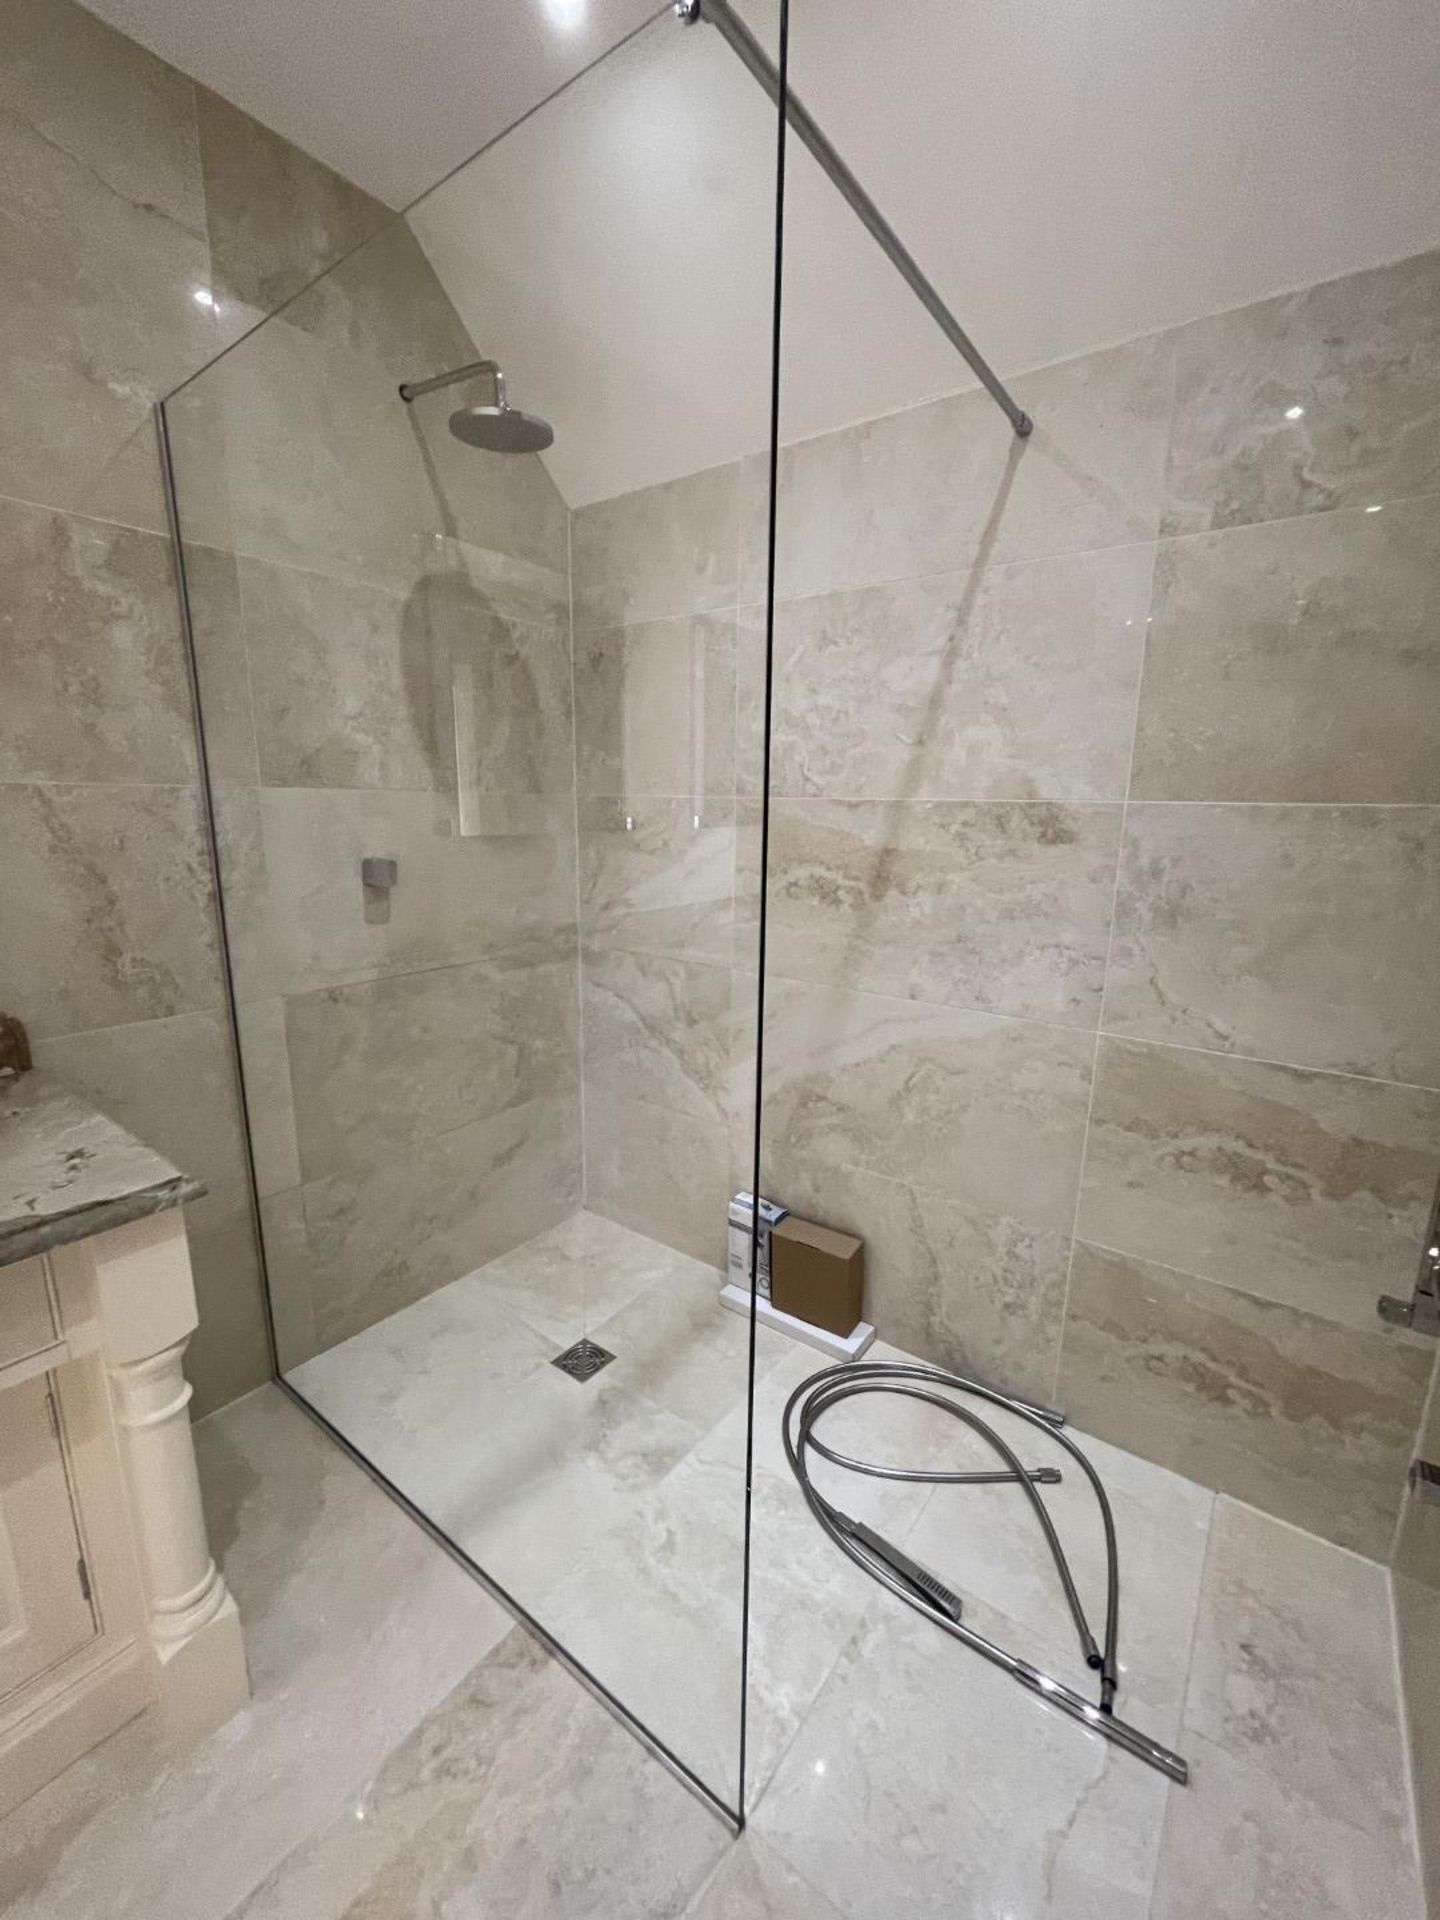 1 x Premium Shower and Enclosure + Hansgrove Controls and Thermostat - Ref: PAN232 - CL896 - NO - Image 16 of 21